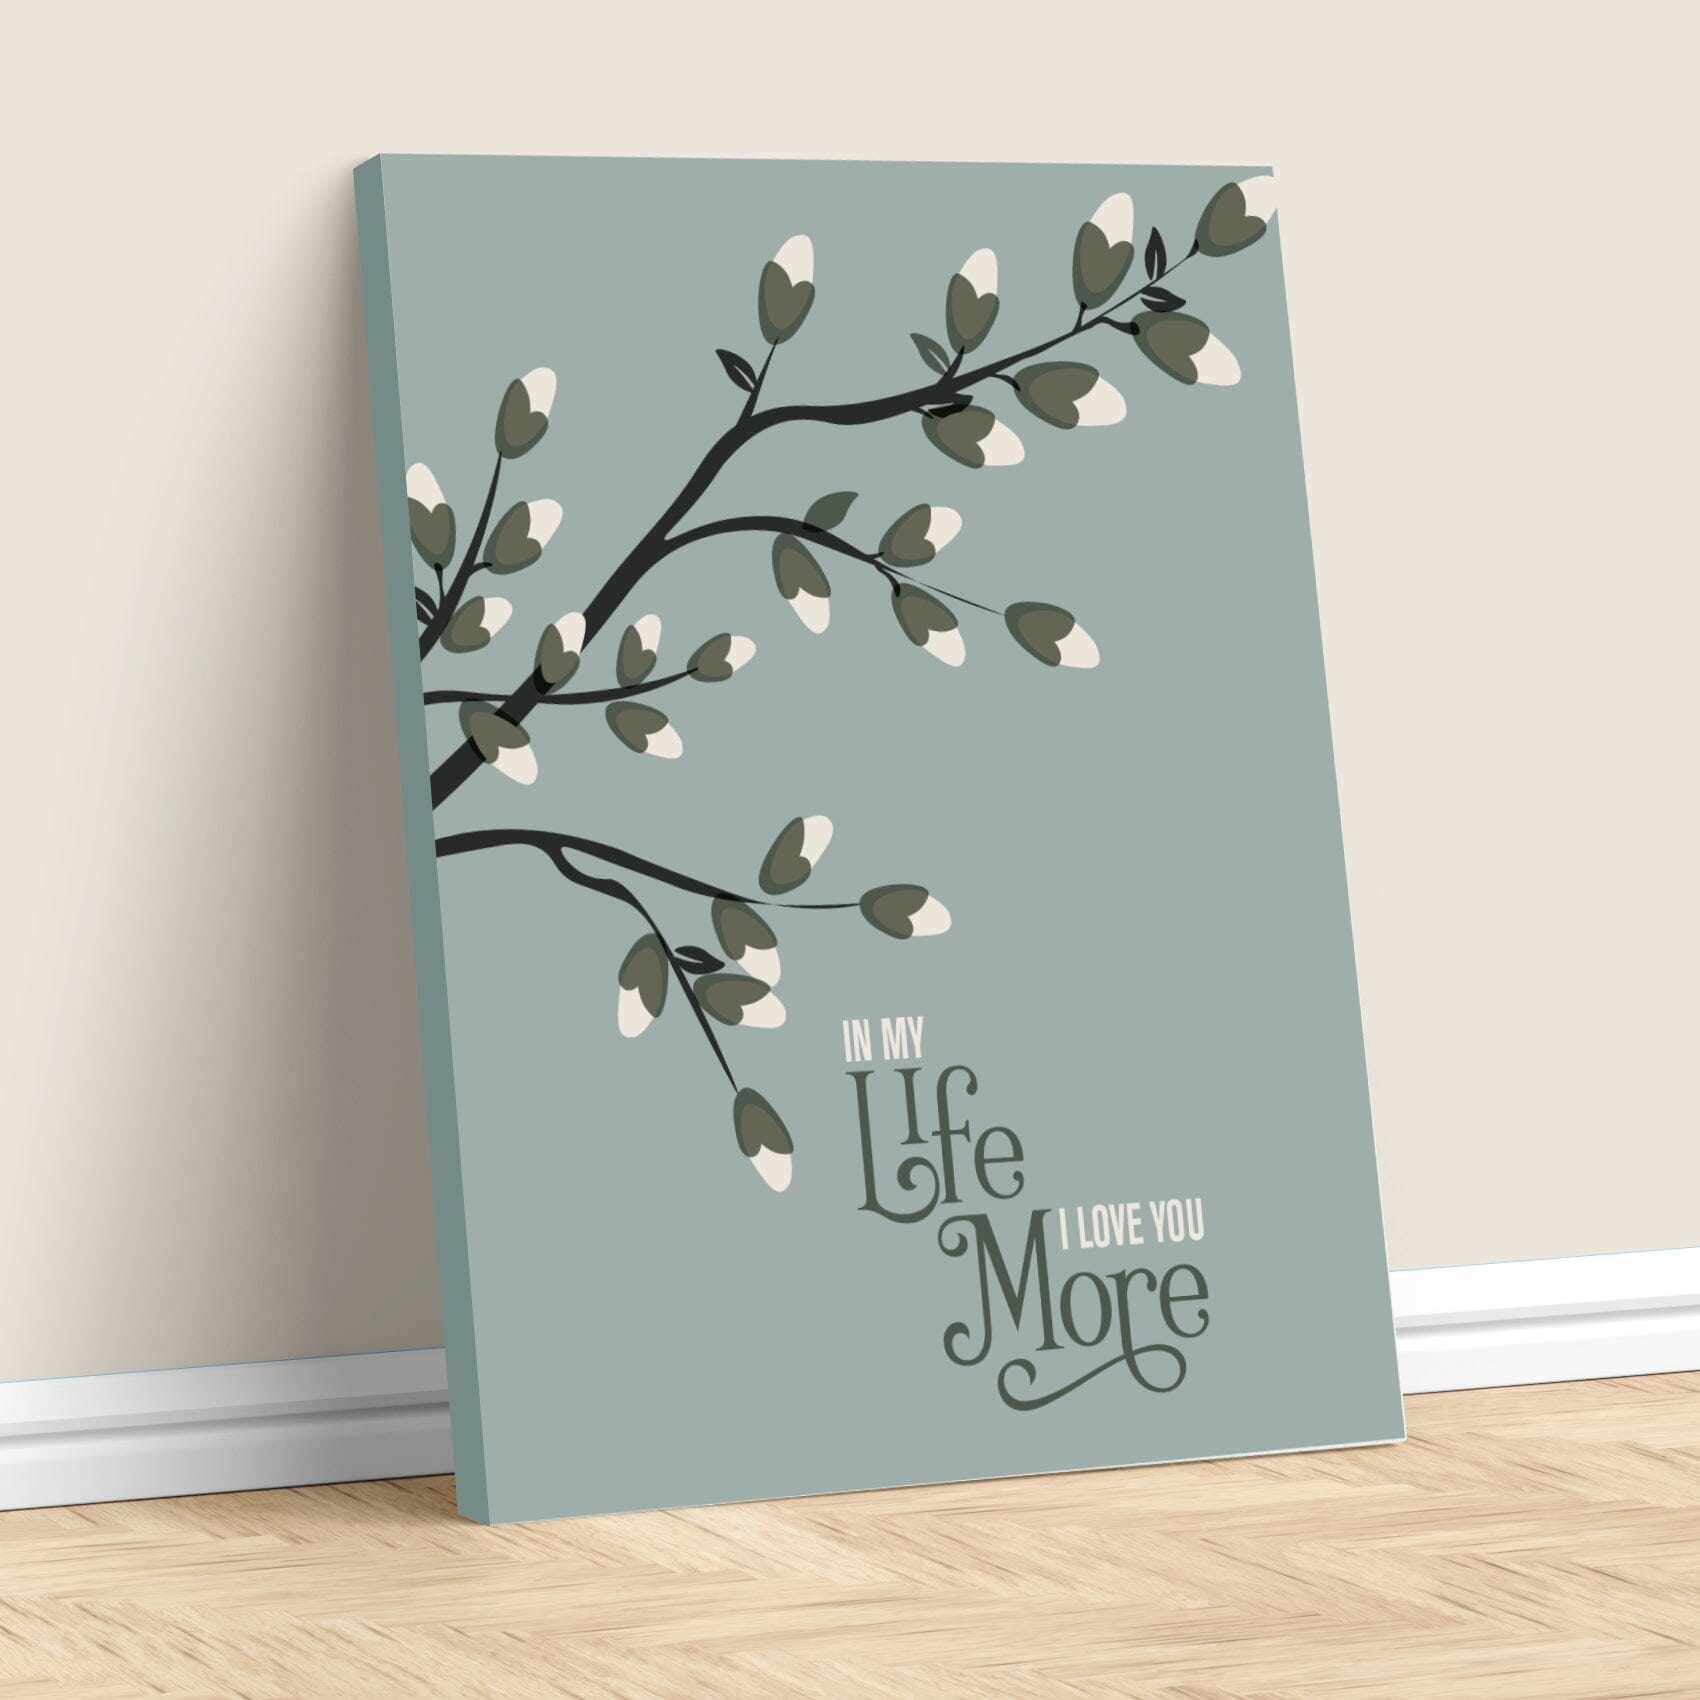 In My Life by the Beatles - Music Print Song Lyric Art Song Lyrics Art Song Lyrics Art 11x14 Canvas Wrap 